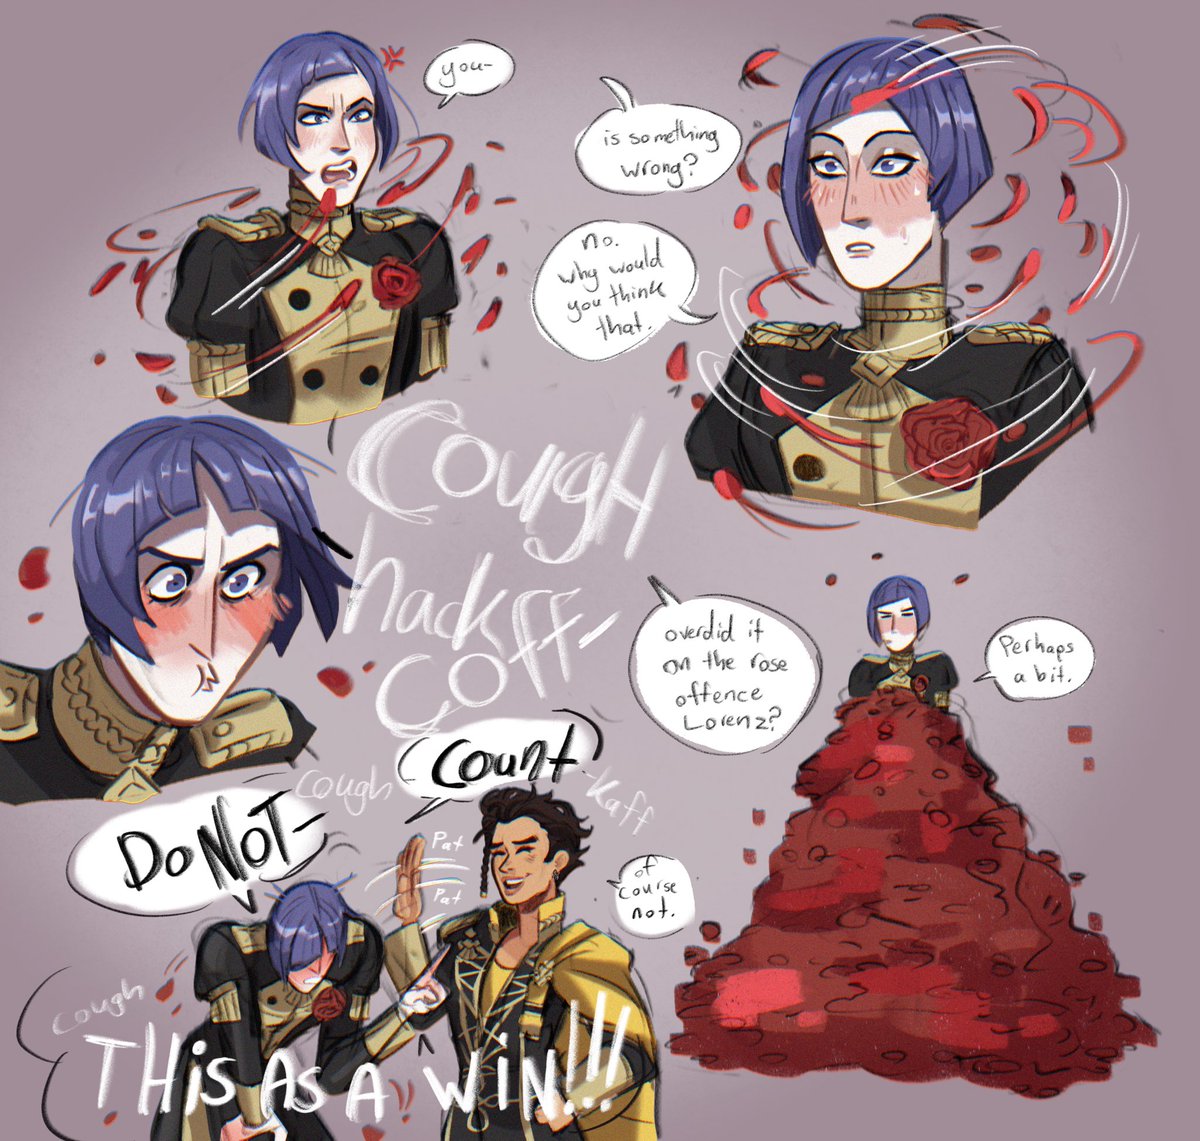 Lots of thoughts about three houses lorenz and his rose petal whirlwind 